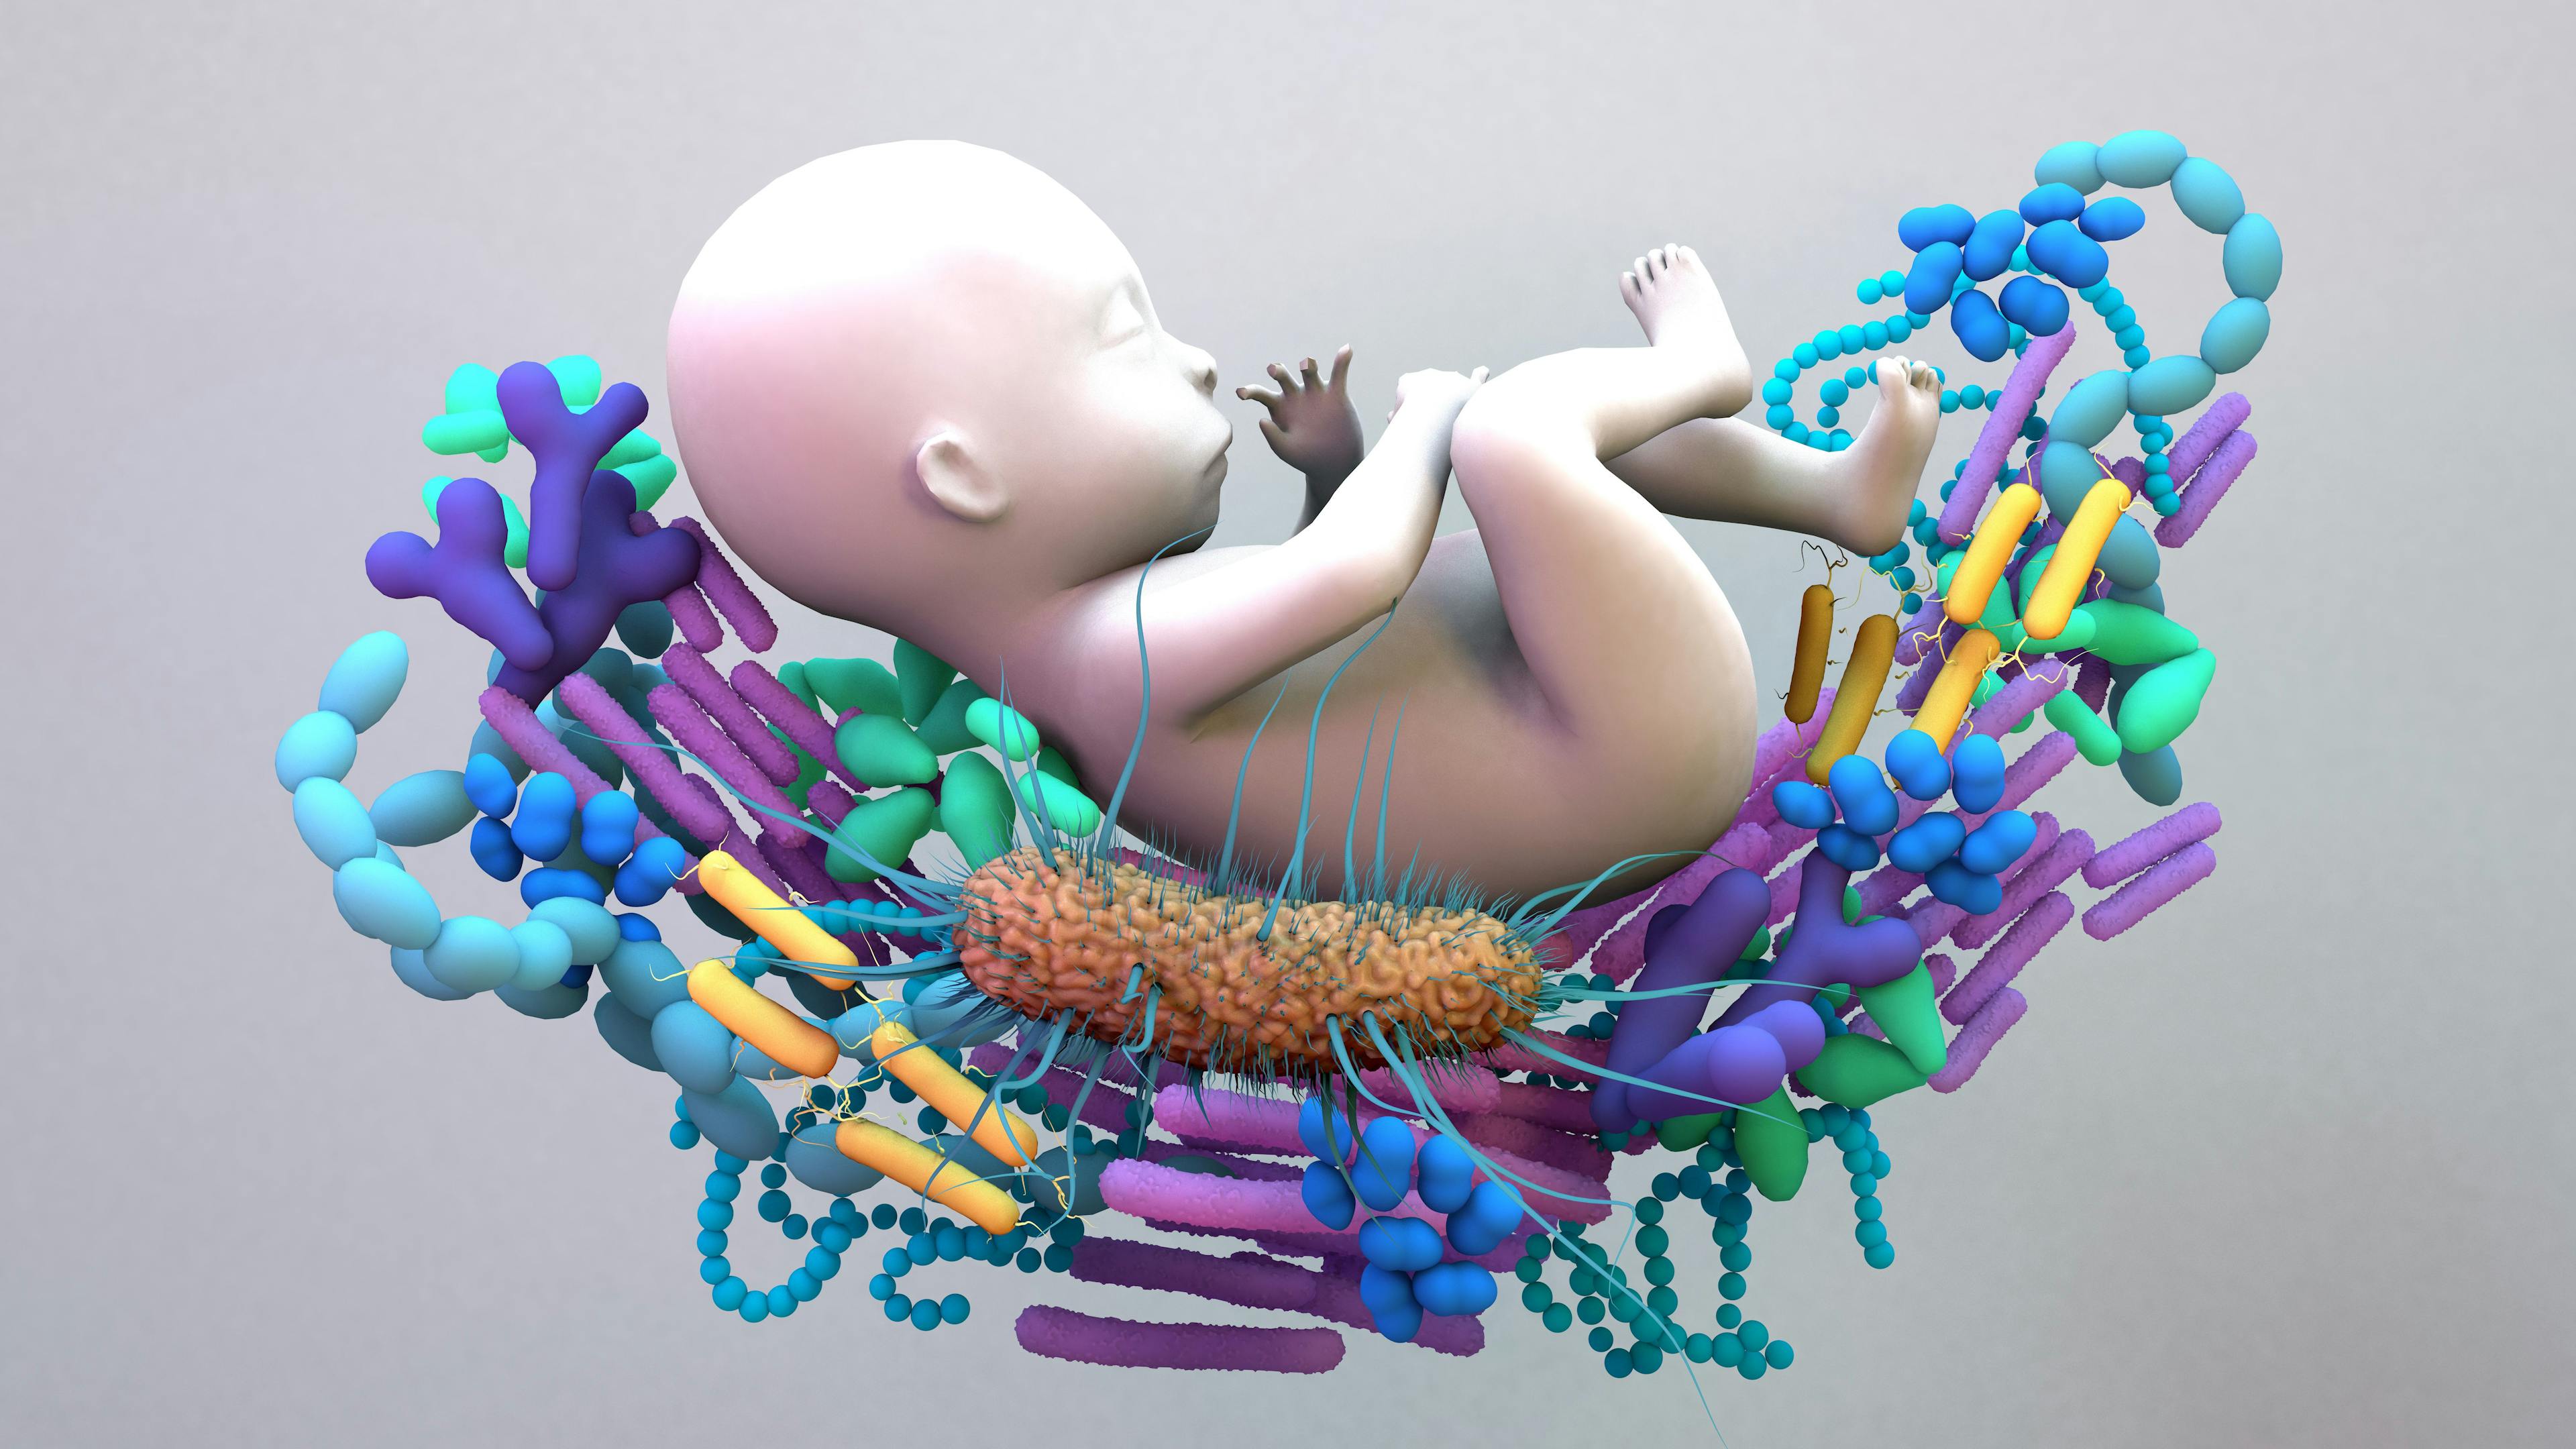 Type of Delivery Does Not Affect How a Baby's Microbiome Is Developed, Study Finds